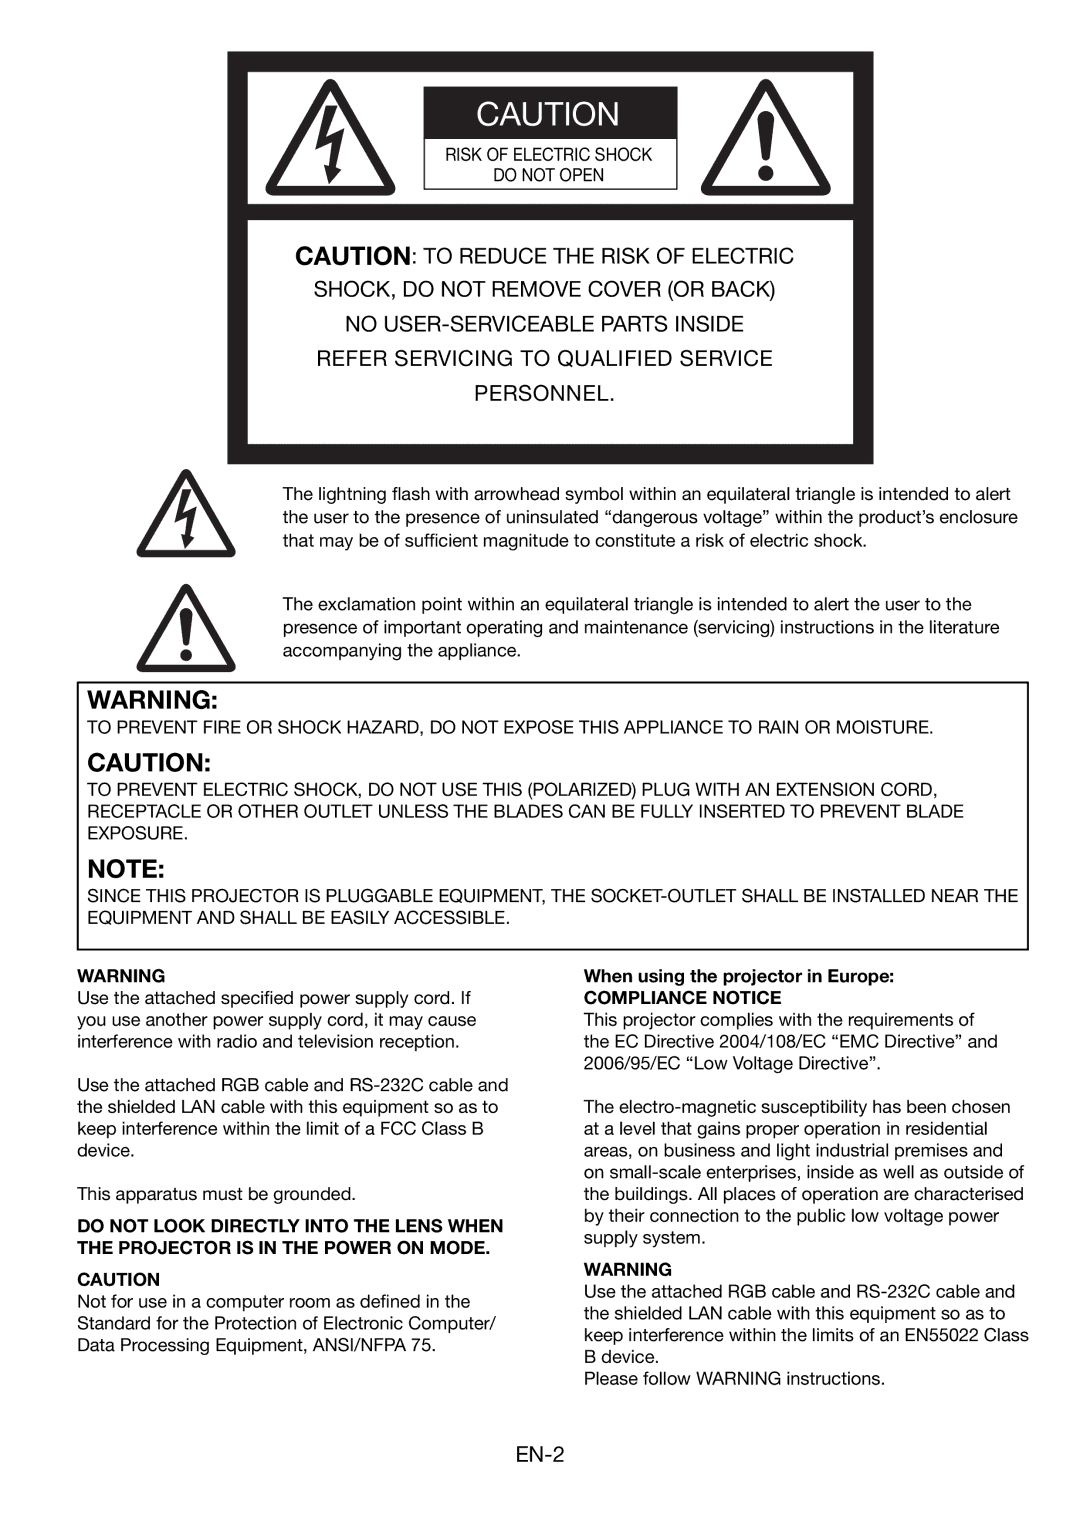 Mitsubishi Electronics FL7000 user manual When using the projector in Europe, Compliance Notice 